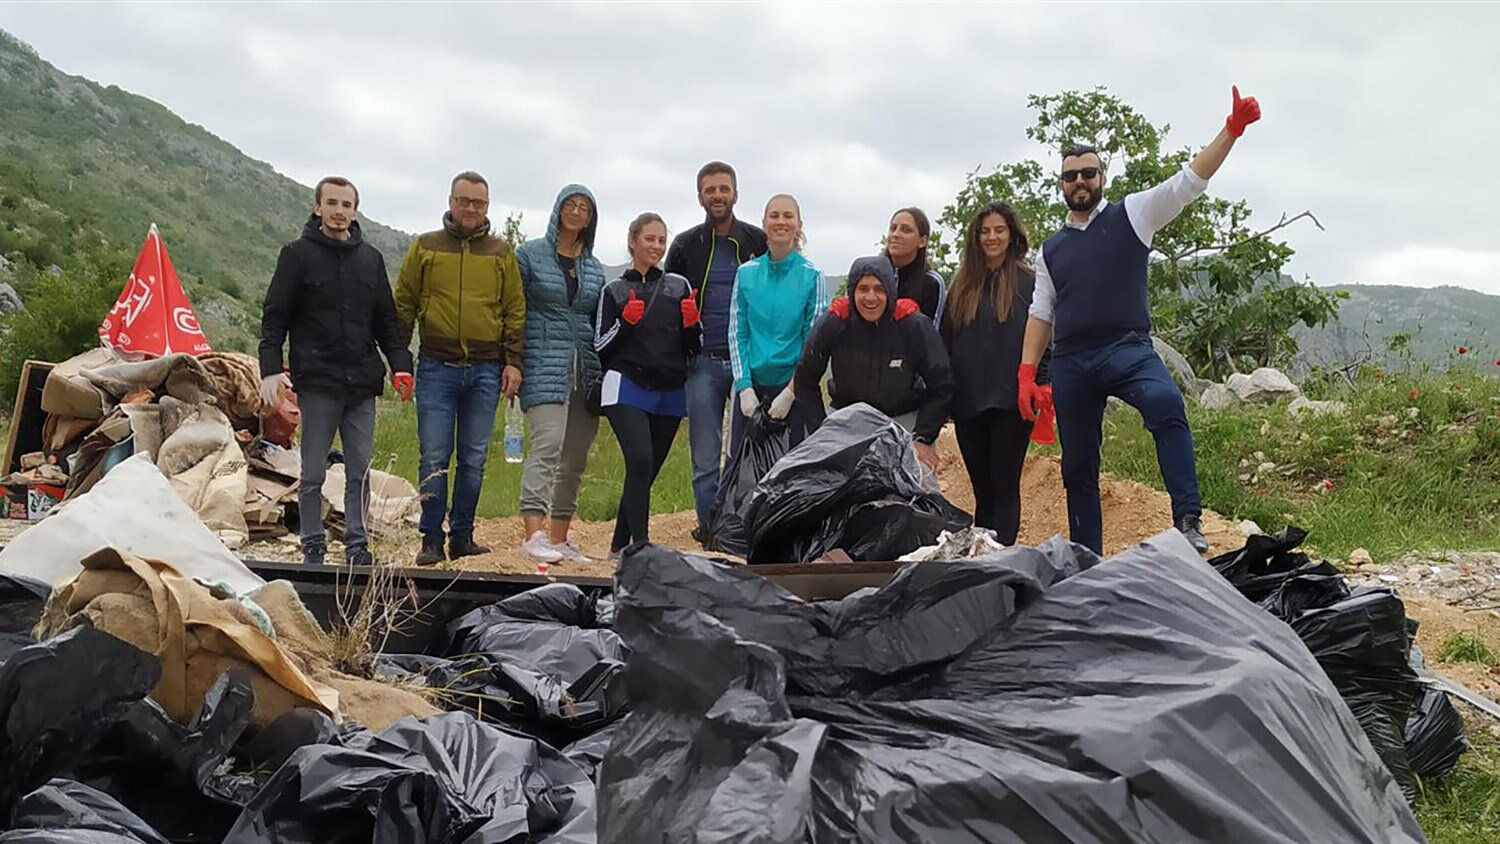 Clean up action in Blagaj